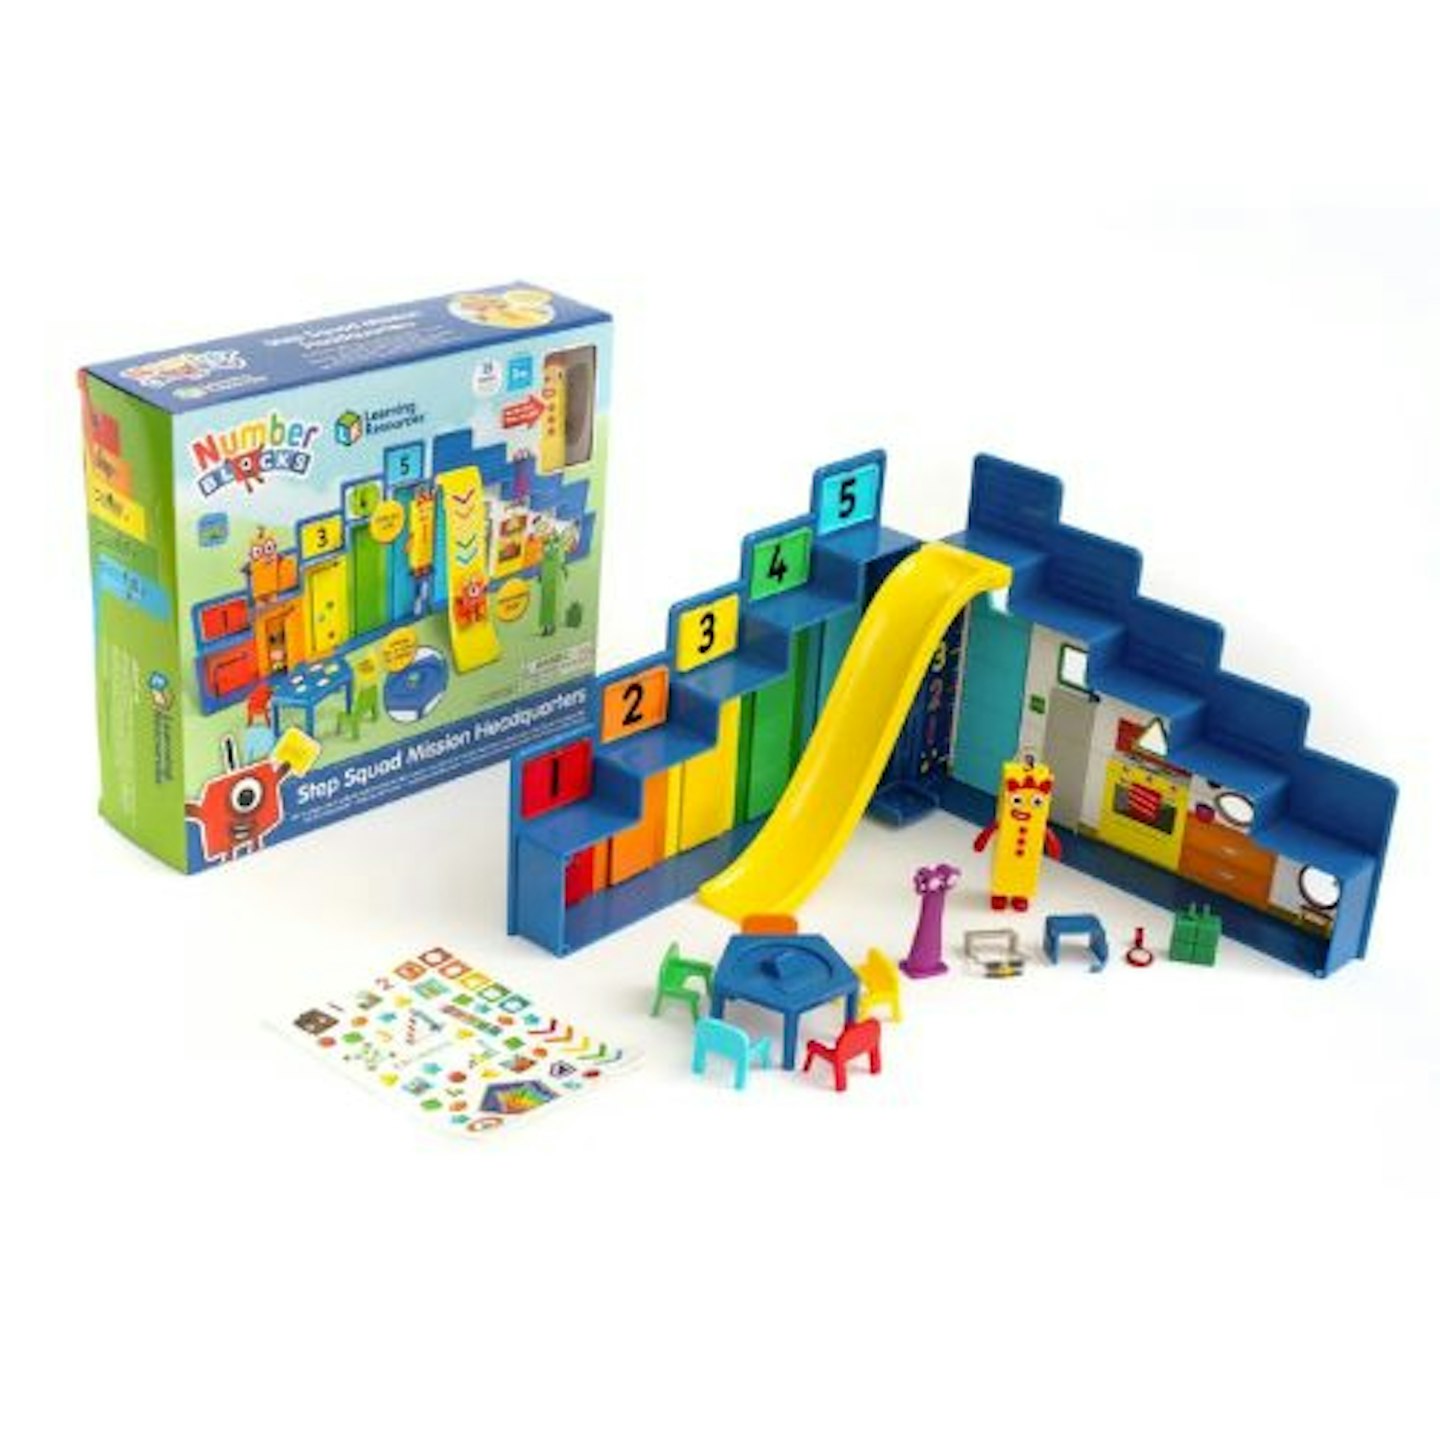  Best Christmas presents for toddlers Numberblocks Step Squad Mission Headquarters